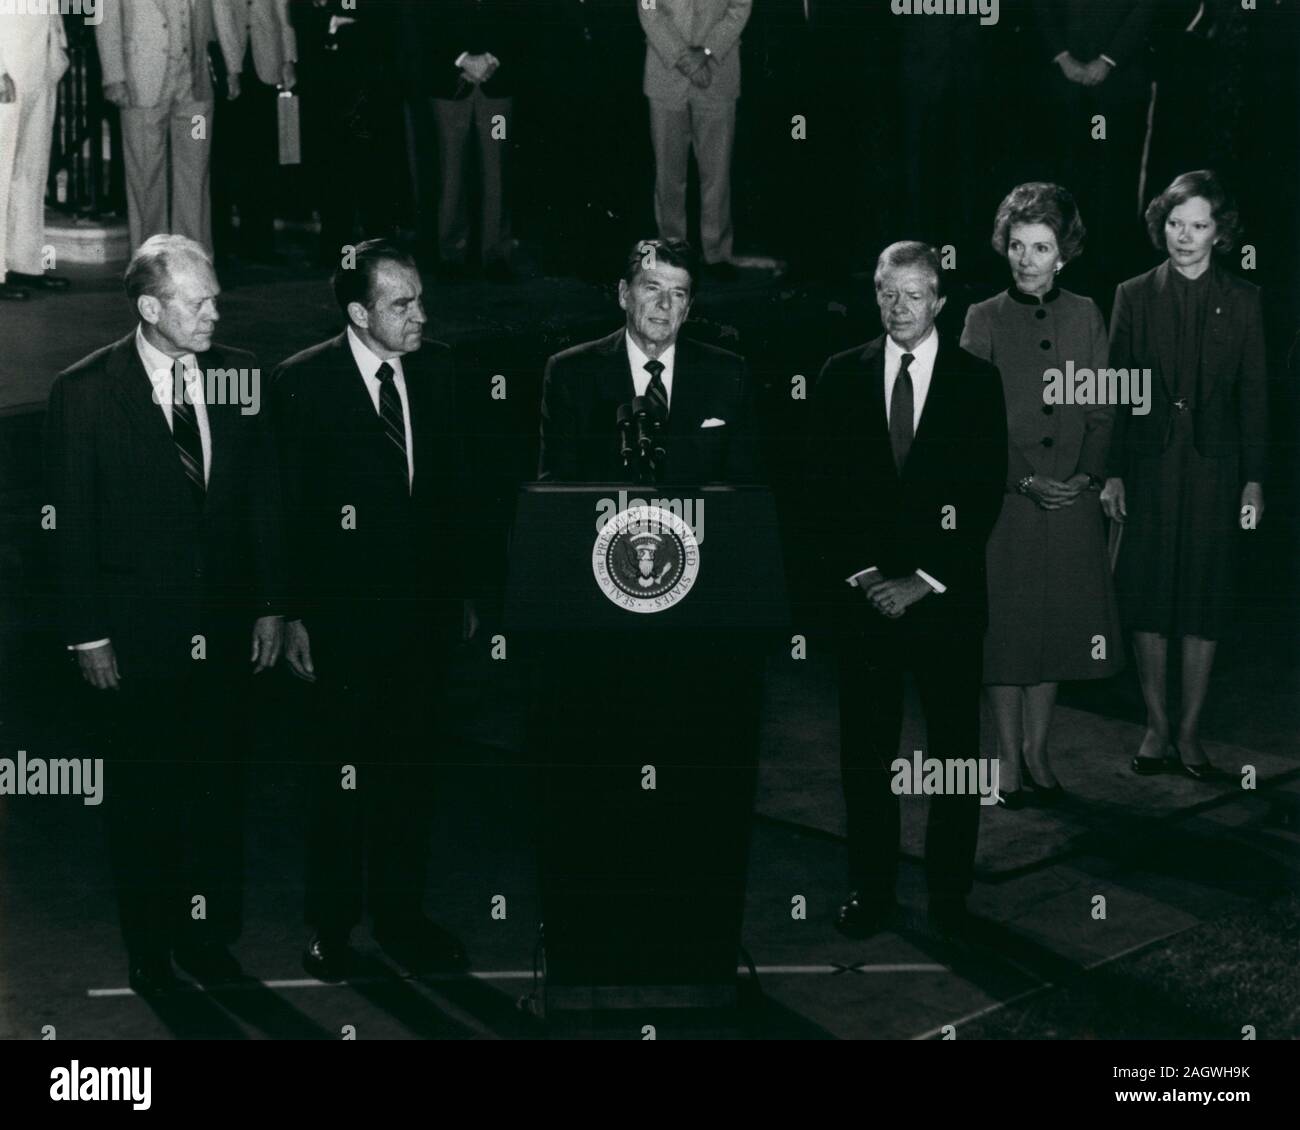 Oct 8, 1981 - Washington, District of Columbia, U.S. - President RONALD W. REAGAN (at podium) as he addressed the nation to eulogize the late President Sadat of Egypt. Sadat was assassinated October 6th in Cairo while reviewing a parade. Shown left to right are: Former president GERALD R. FORD; Former president RICHARD M. NIXON; (president Reagan); former president JIMMY CARTER, First Lady NANCY REAGAN and former first lady, ROSALYNN CARTER. The four men will be part of the U.S. Delegation attending the funeral for the slain leader. (Credit Image: © Keystone Press Agency/Keystone USA via ZUMAP Stock Photo